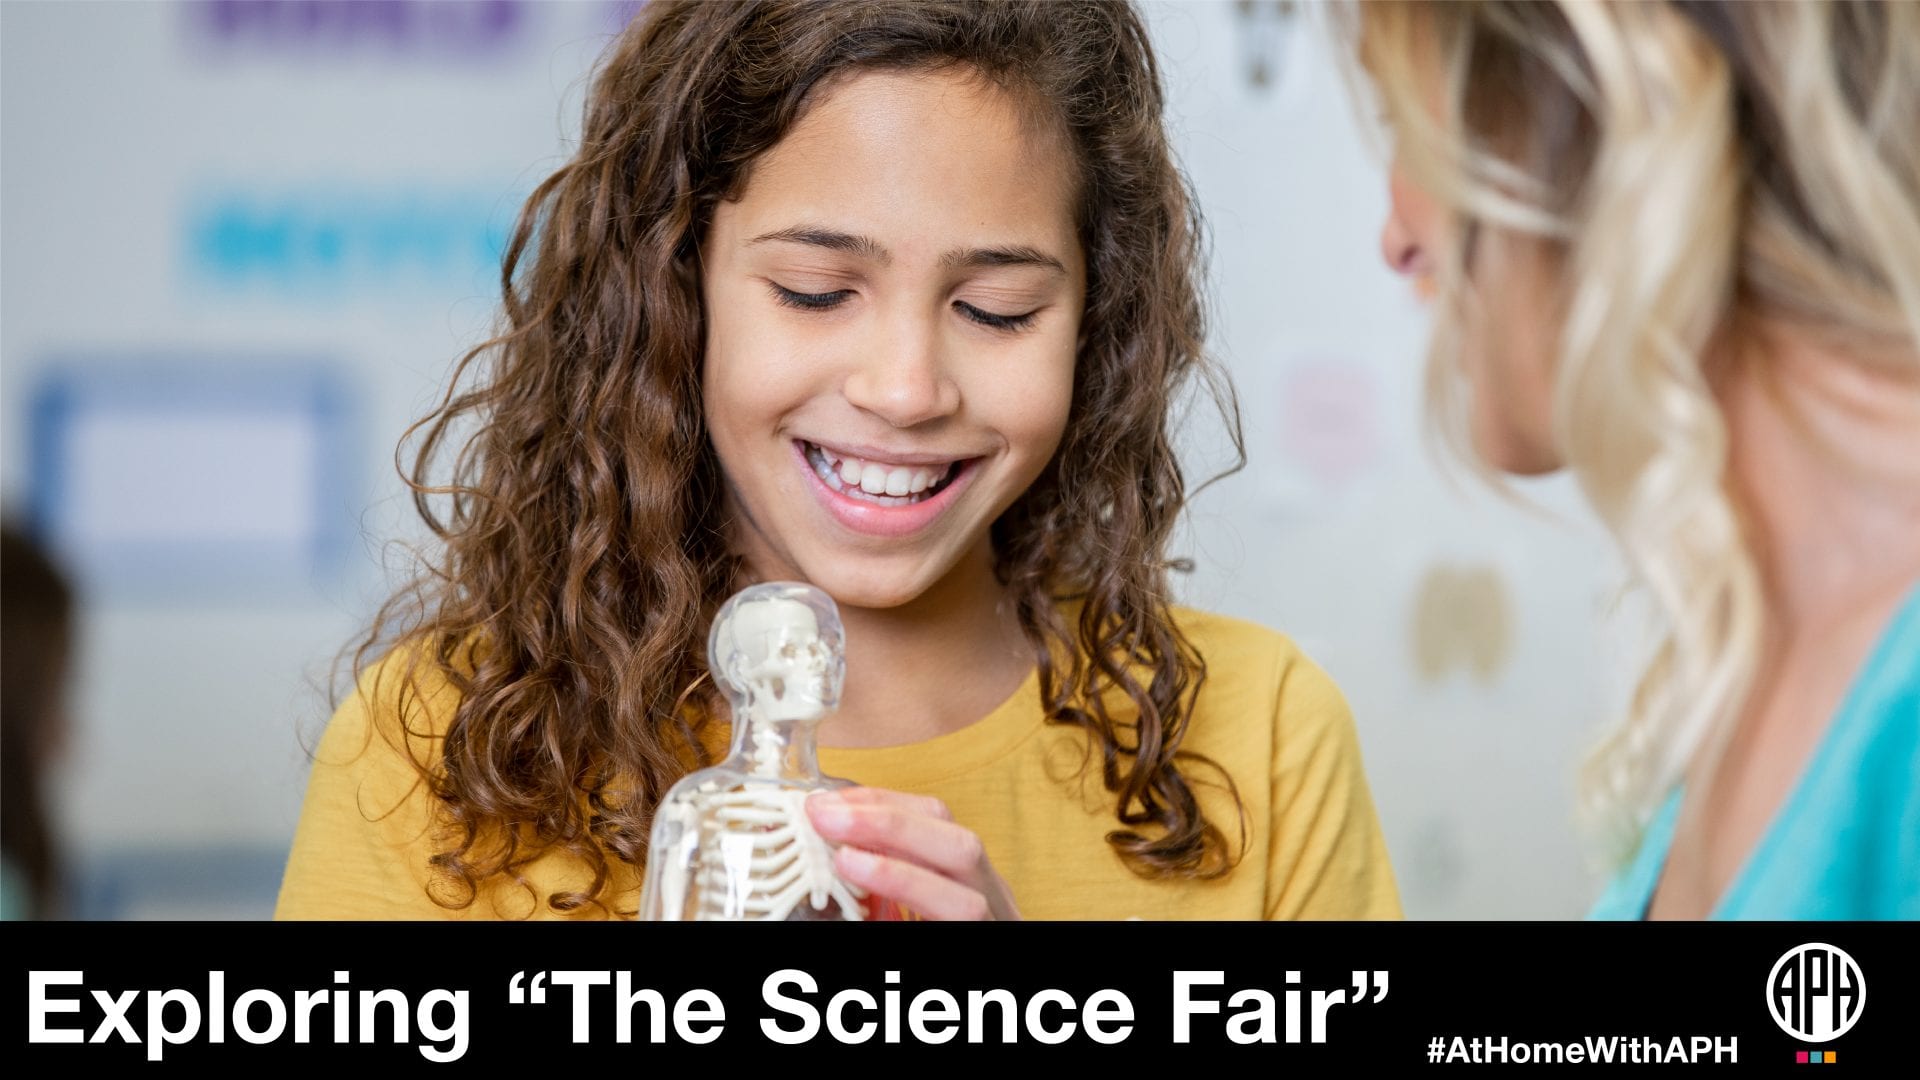 a girl holding a miniature model of the human skeleton and talking to an adult. text reads "Exploring 'The Science Fair' #AtHomeWithAPH"